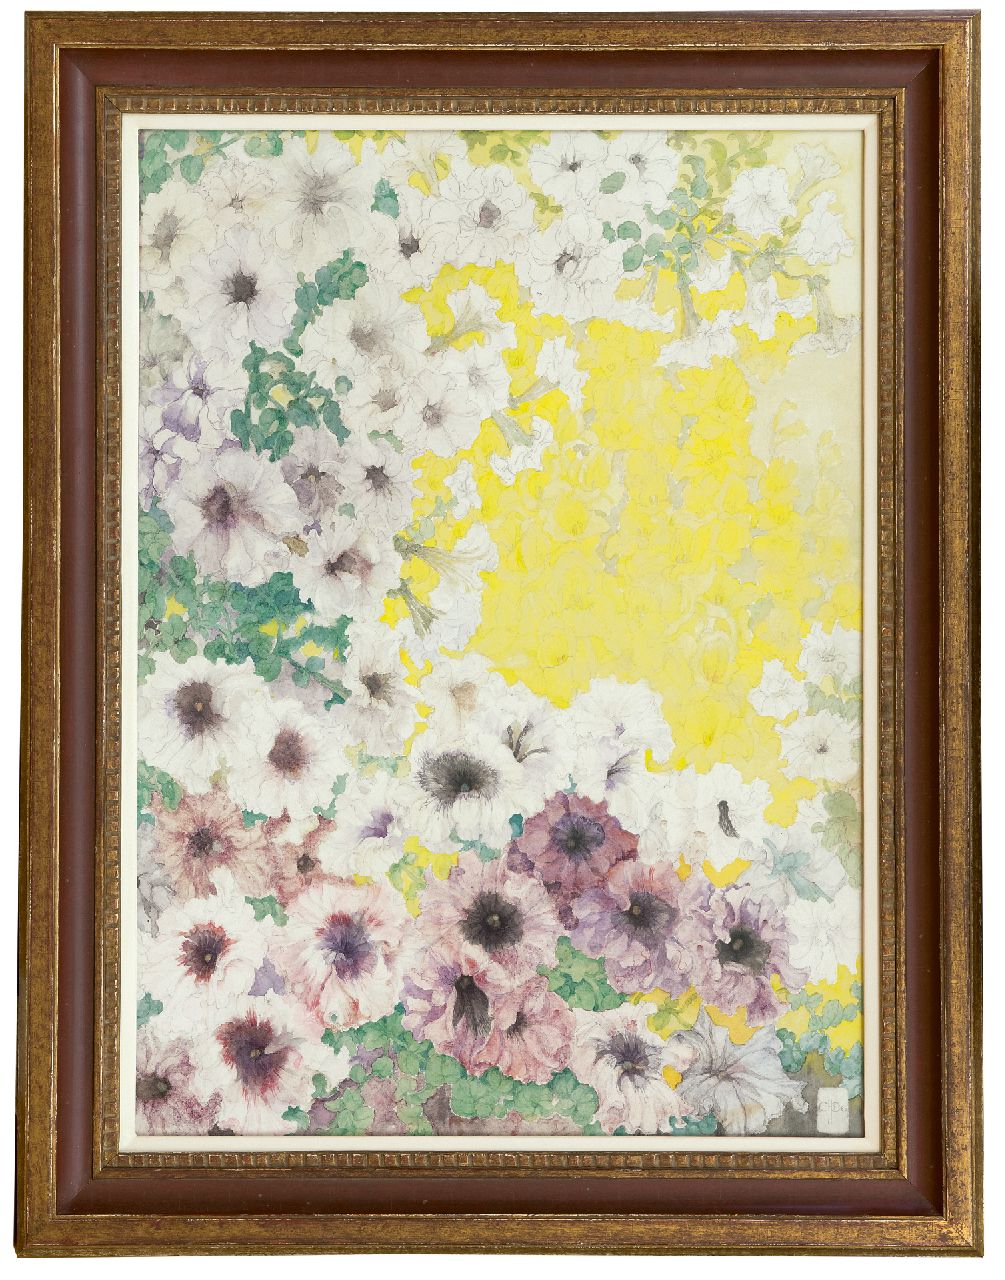 Dee C.H.  | Corneille Henri Dee | Watercolours and drawings offered for sale | Spring flowers, pencil and watercolour on paper 77.0 x 55.0 cm, signed l.r. with monogram